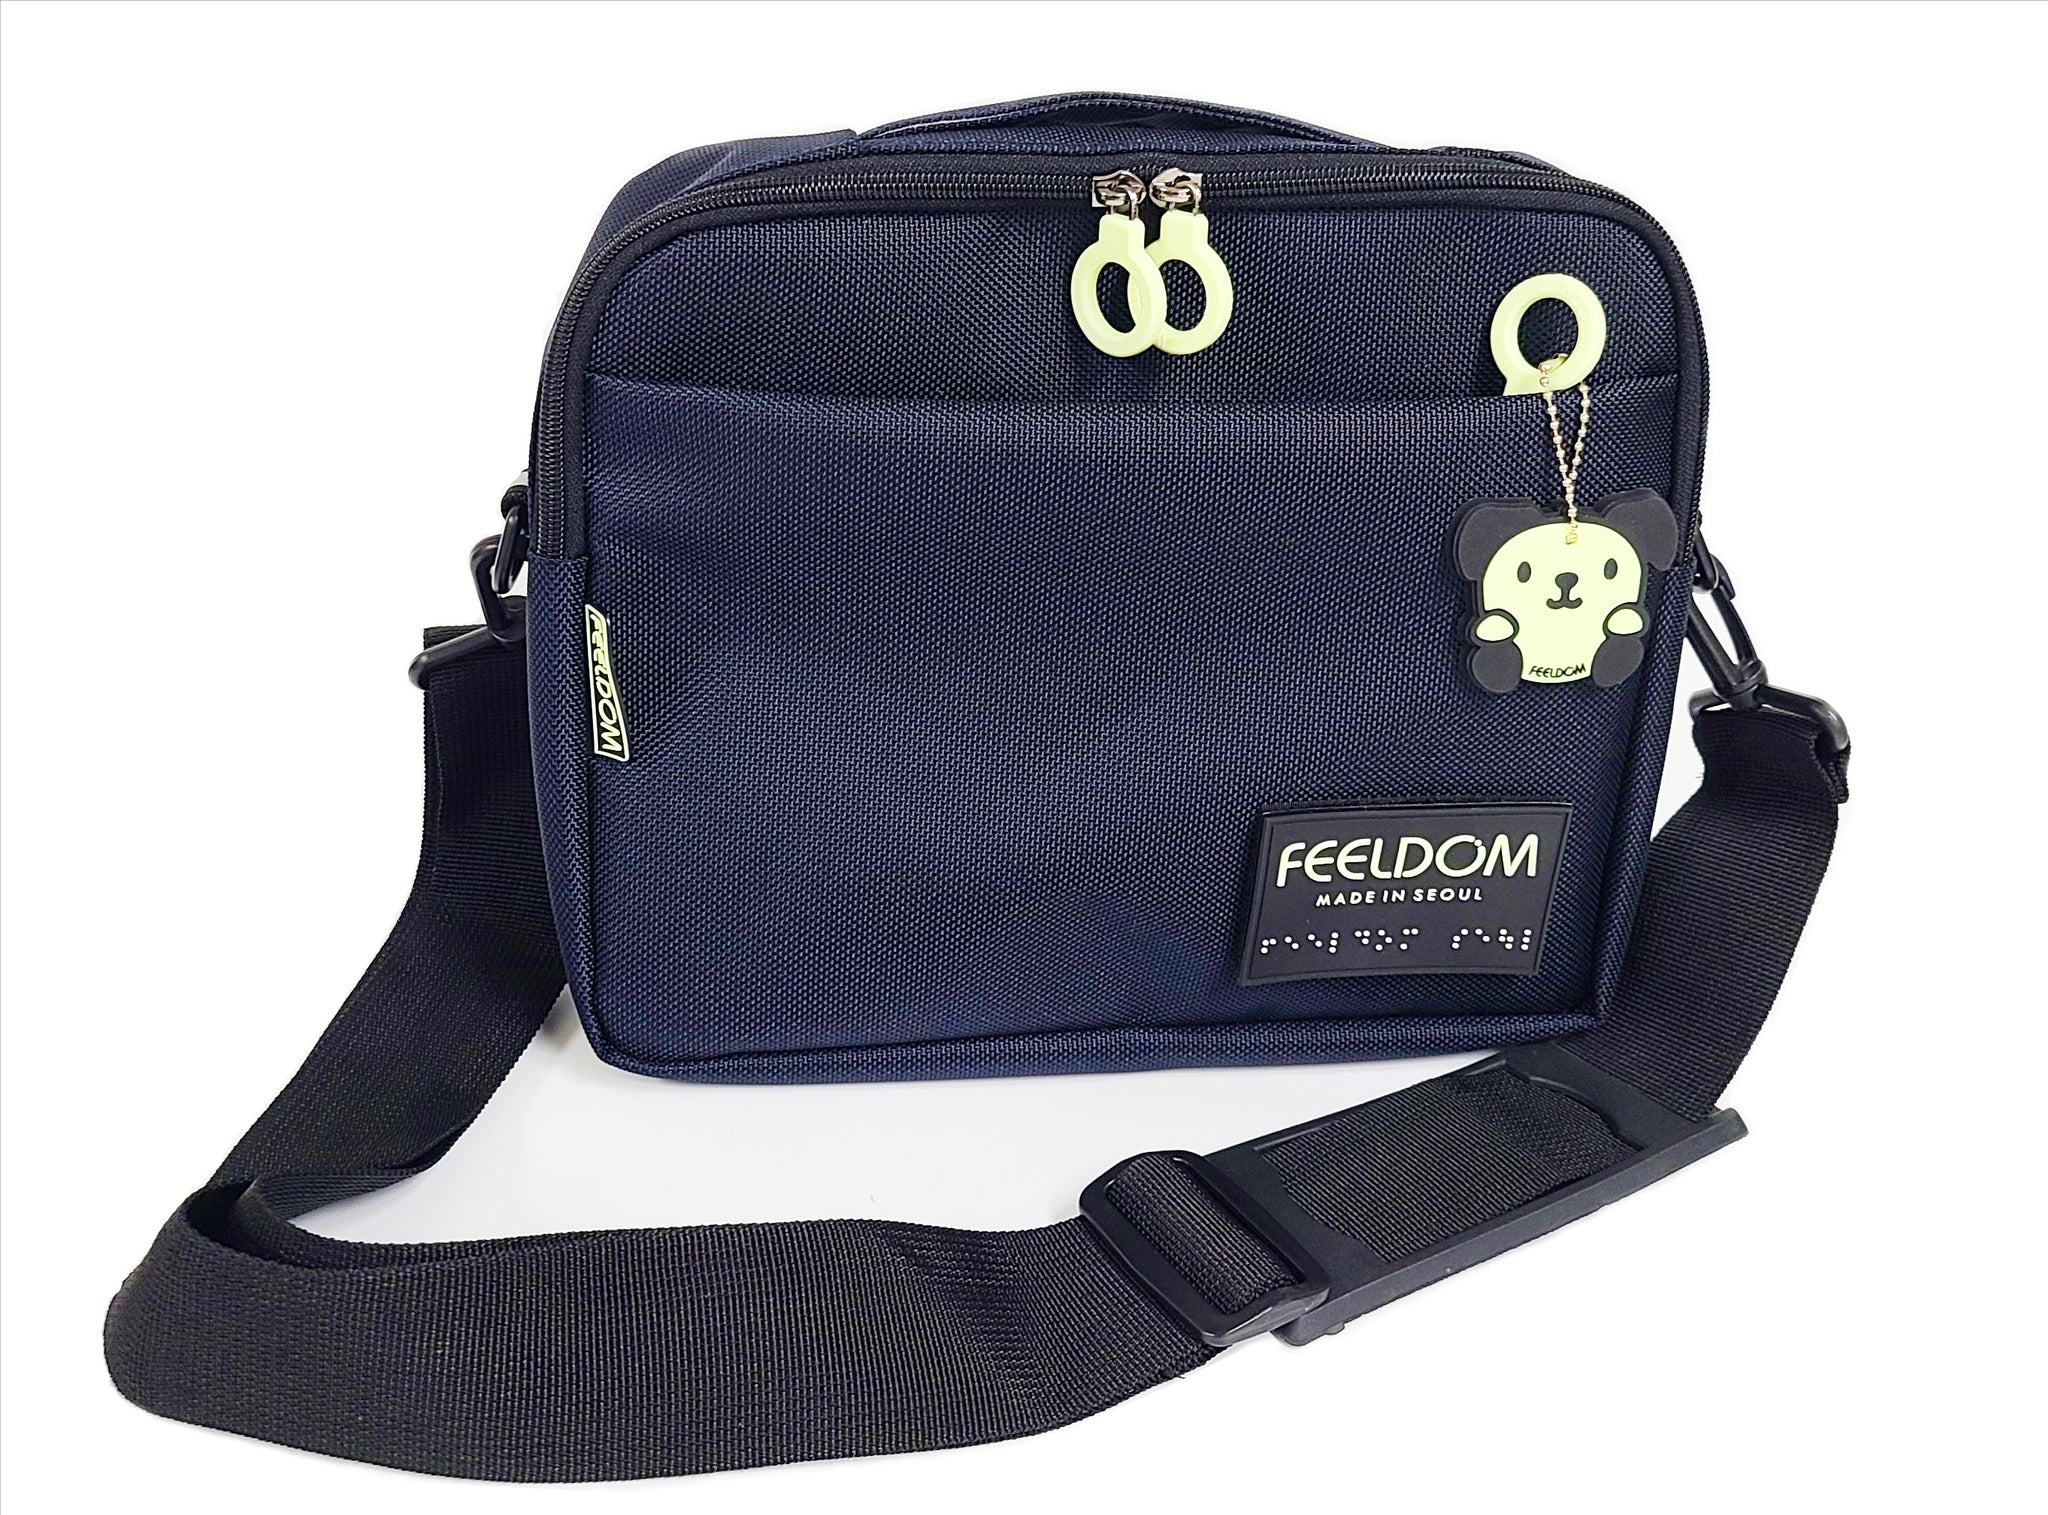 Dark Blue Rectangle pouch with double white zipper closure and front zipper pocket. A glow in the dark dog character rubber keychain and black rubber braille FEELDOM logo patch are on the front. THere is a wide black shoulder strap which is attached to the sides of the pouch. It is 11 inches by 8 inches tall, and 2 to 3 inches thick.